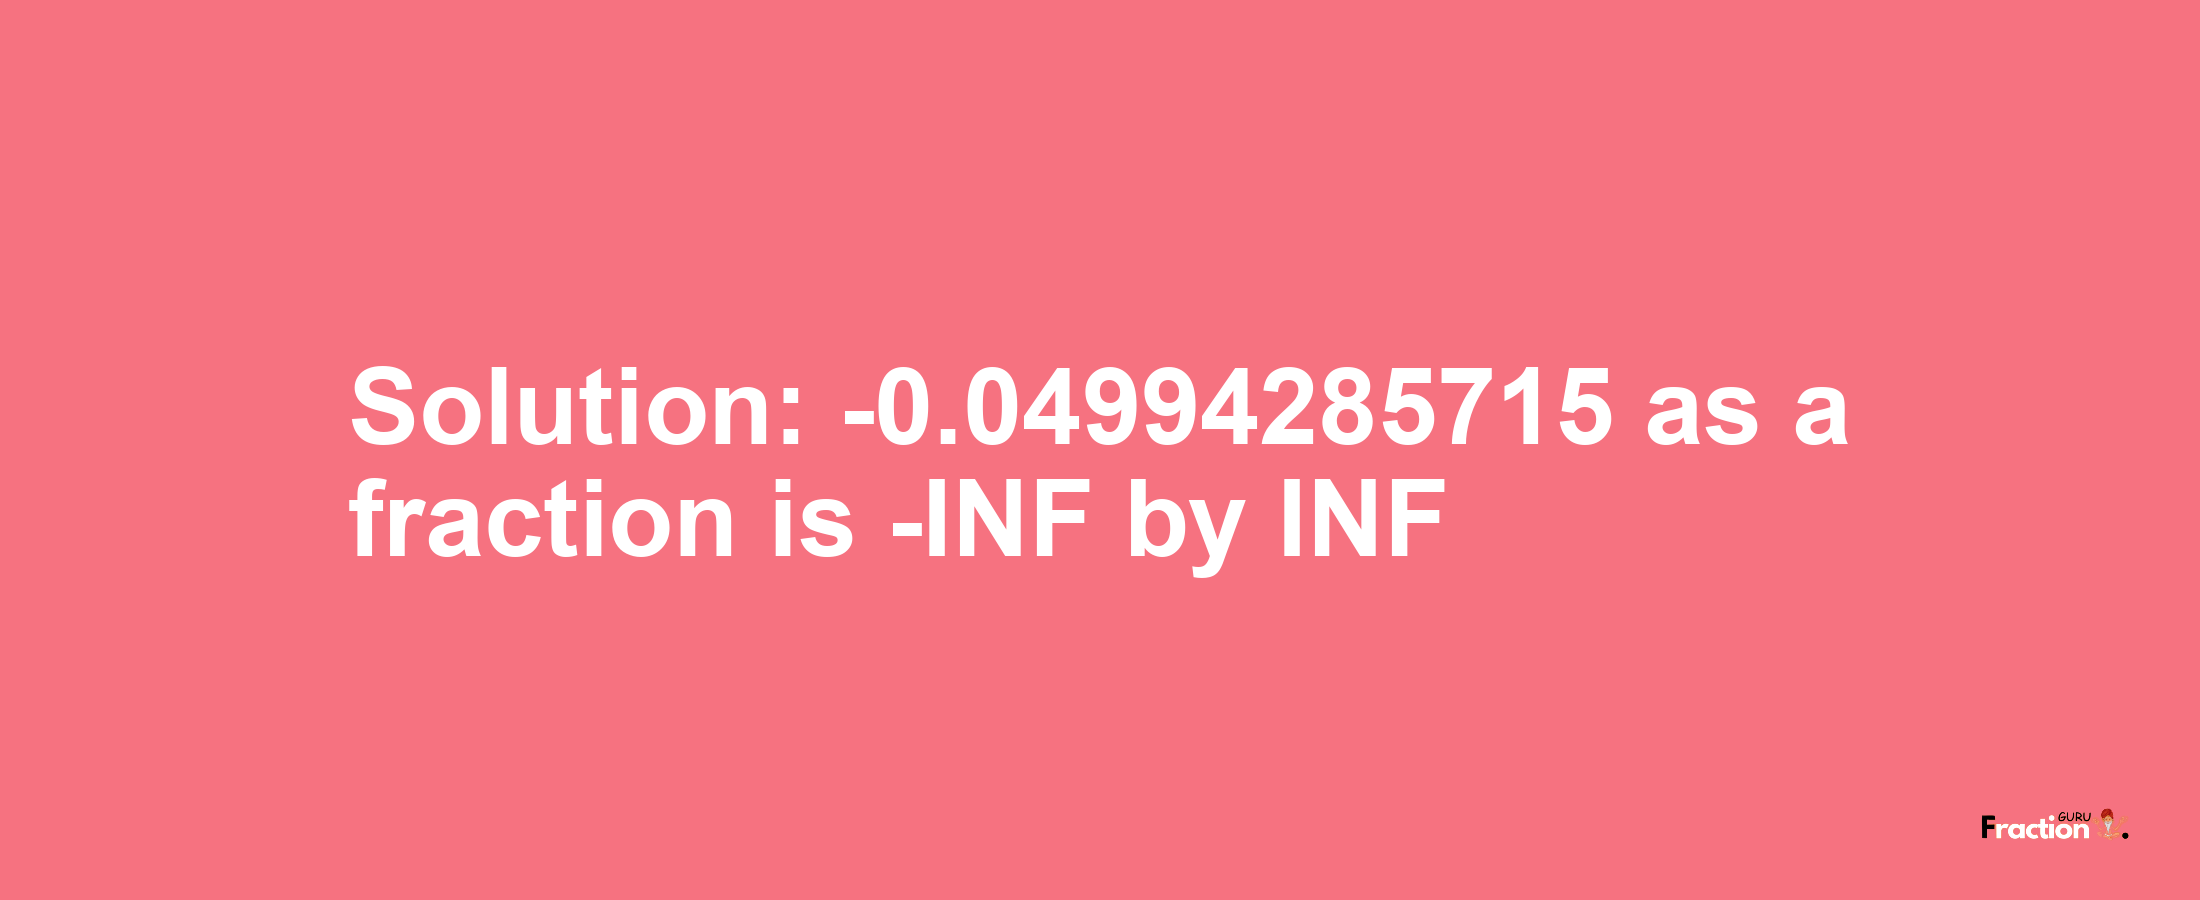 Solution:-0.04994285715 as a fraction is -INF/INF